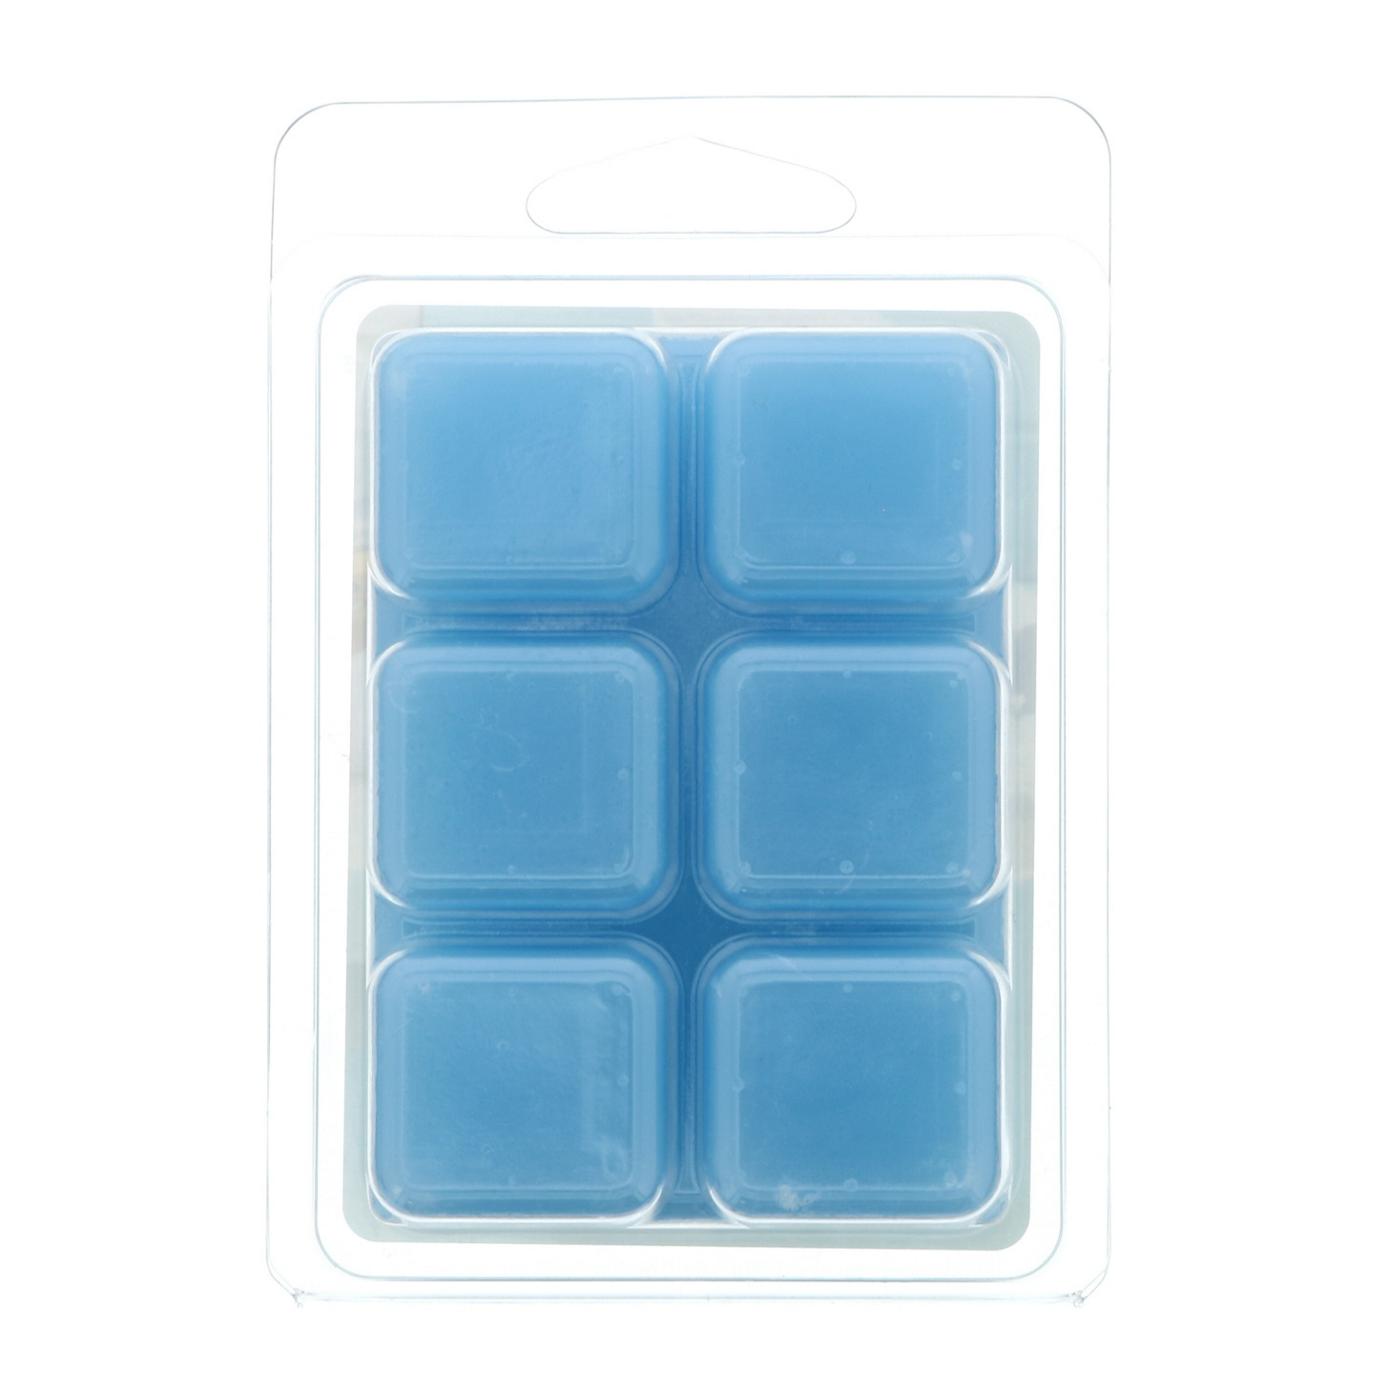 ScentSationals Laundry Fresh Scented Wax Cubes, 6 Ct; image 2 of 2